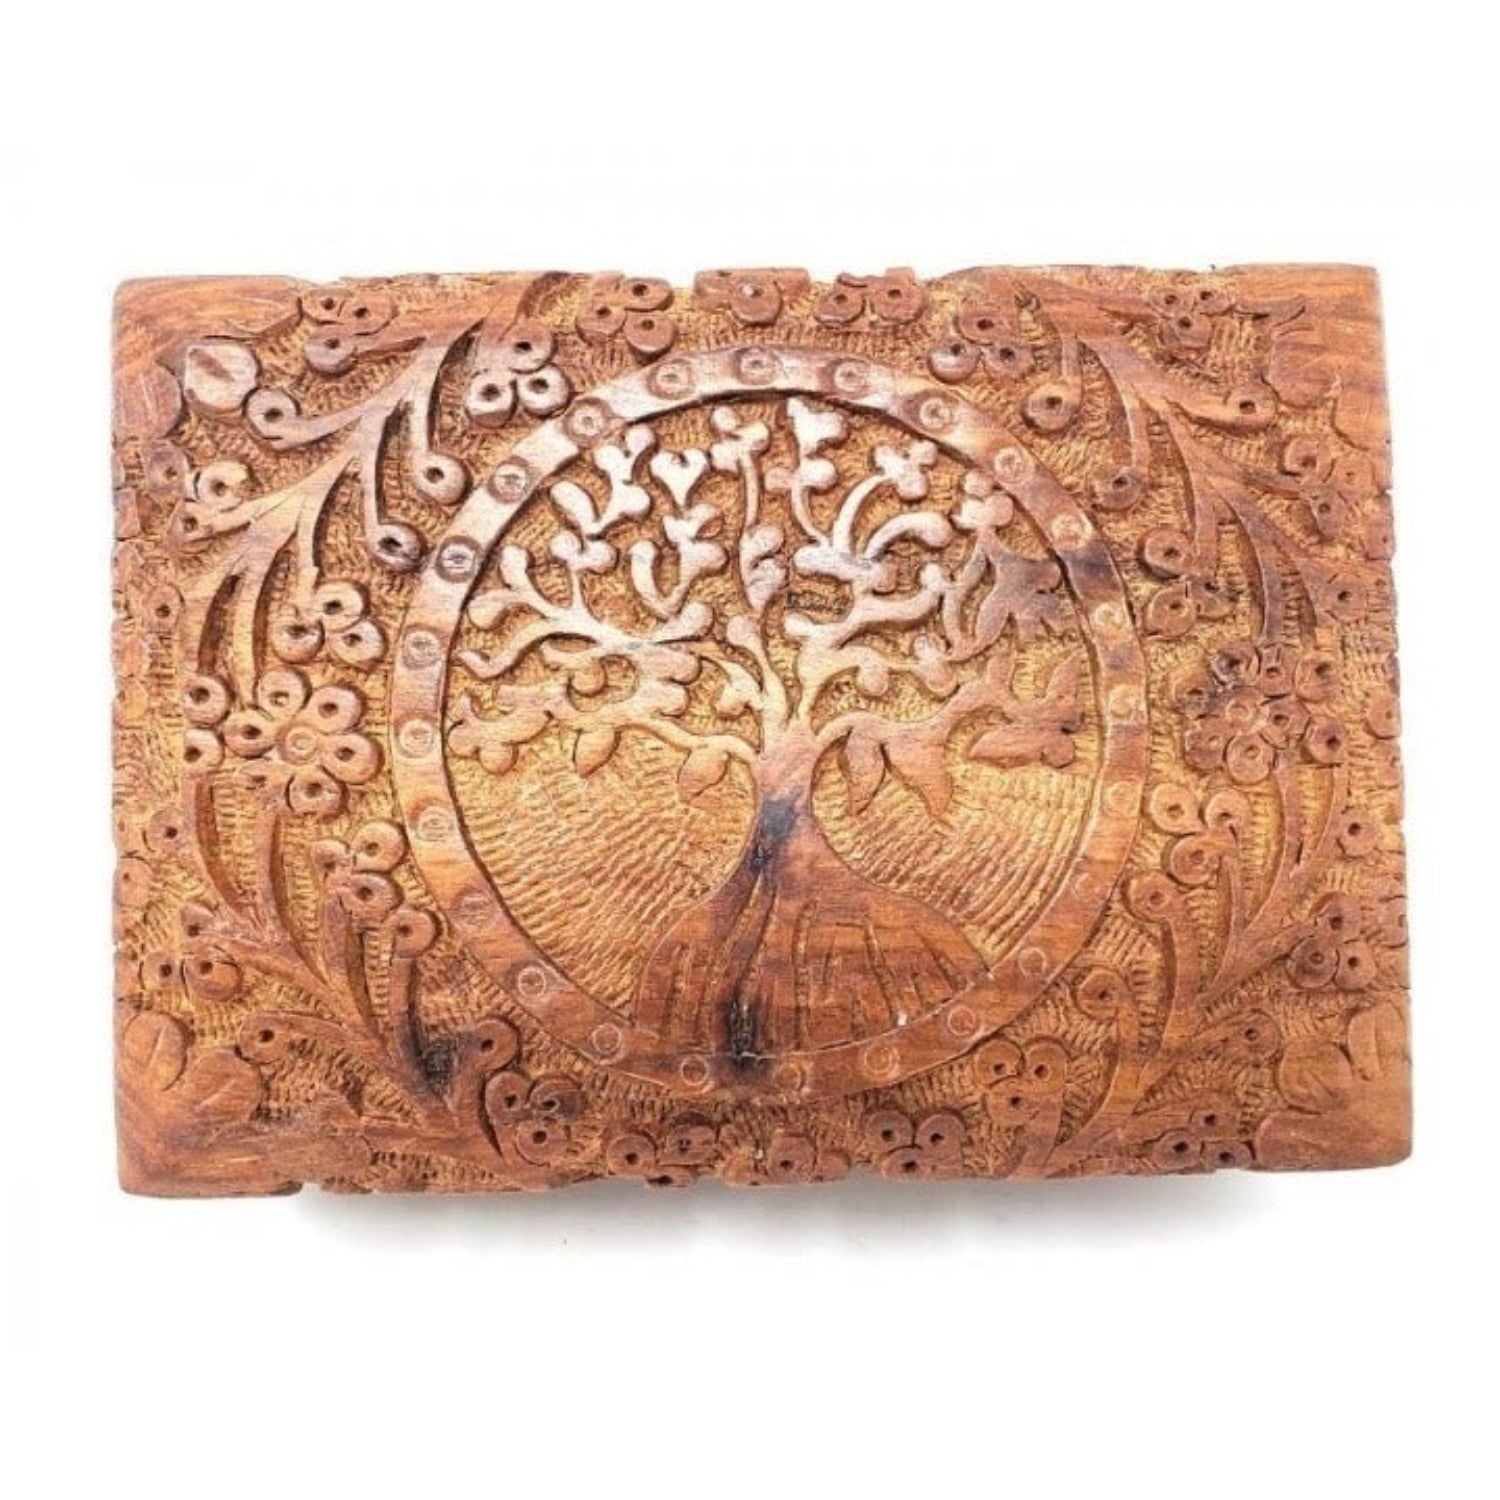 Tree of Life Carved Wood Box 5x7"